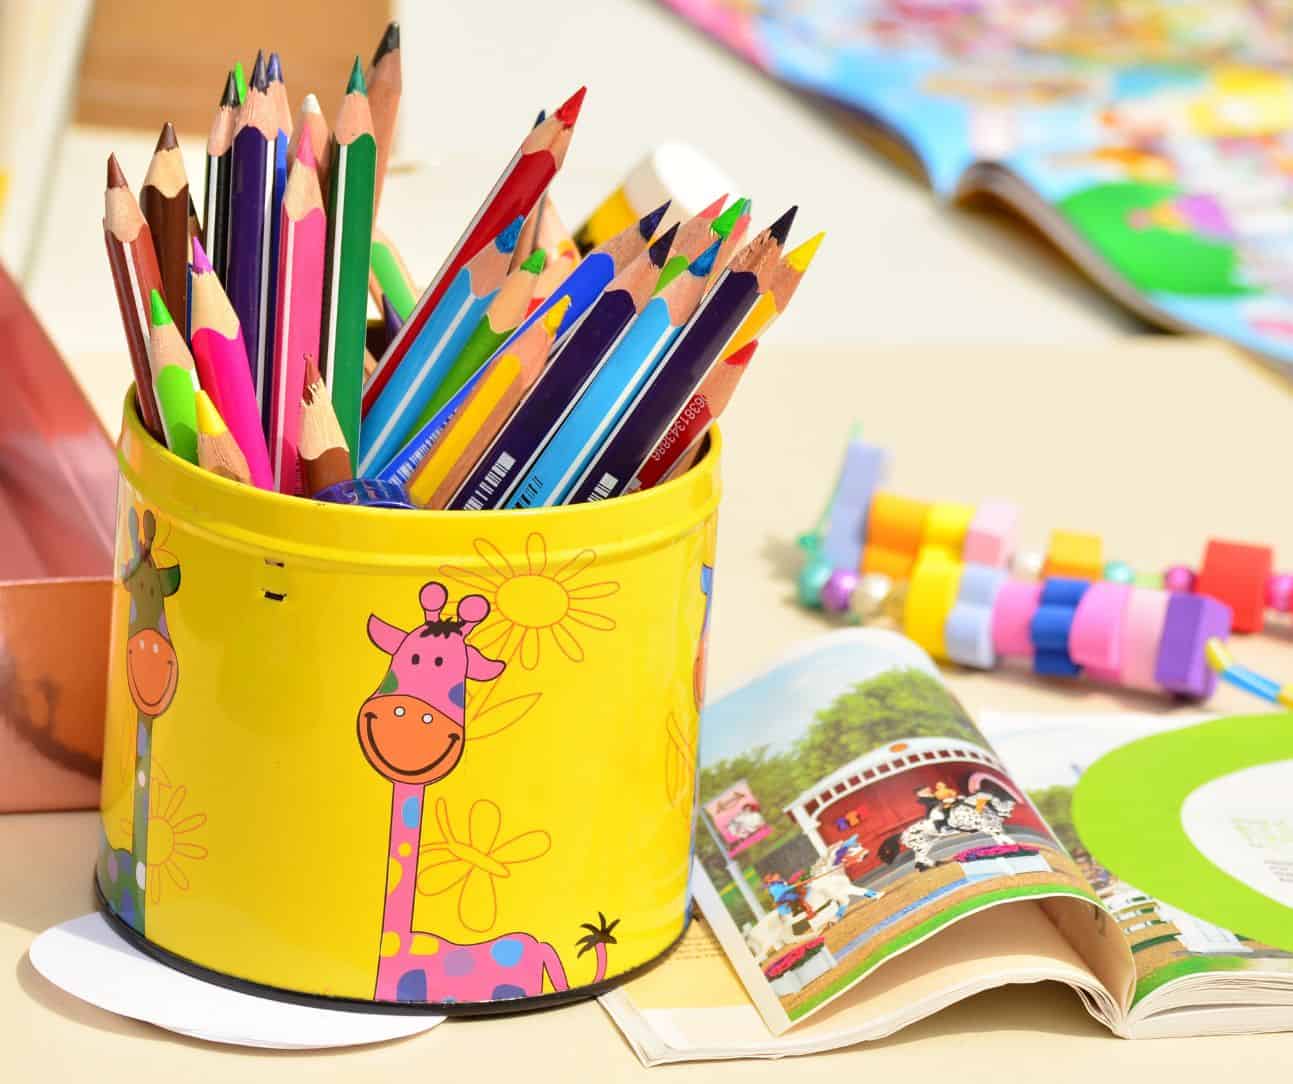 colored pencils for children's coloring books